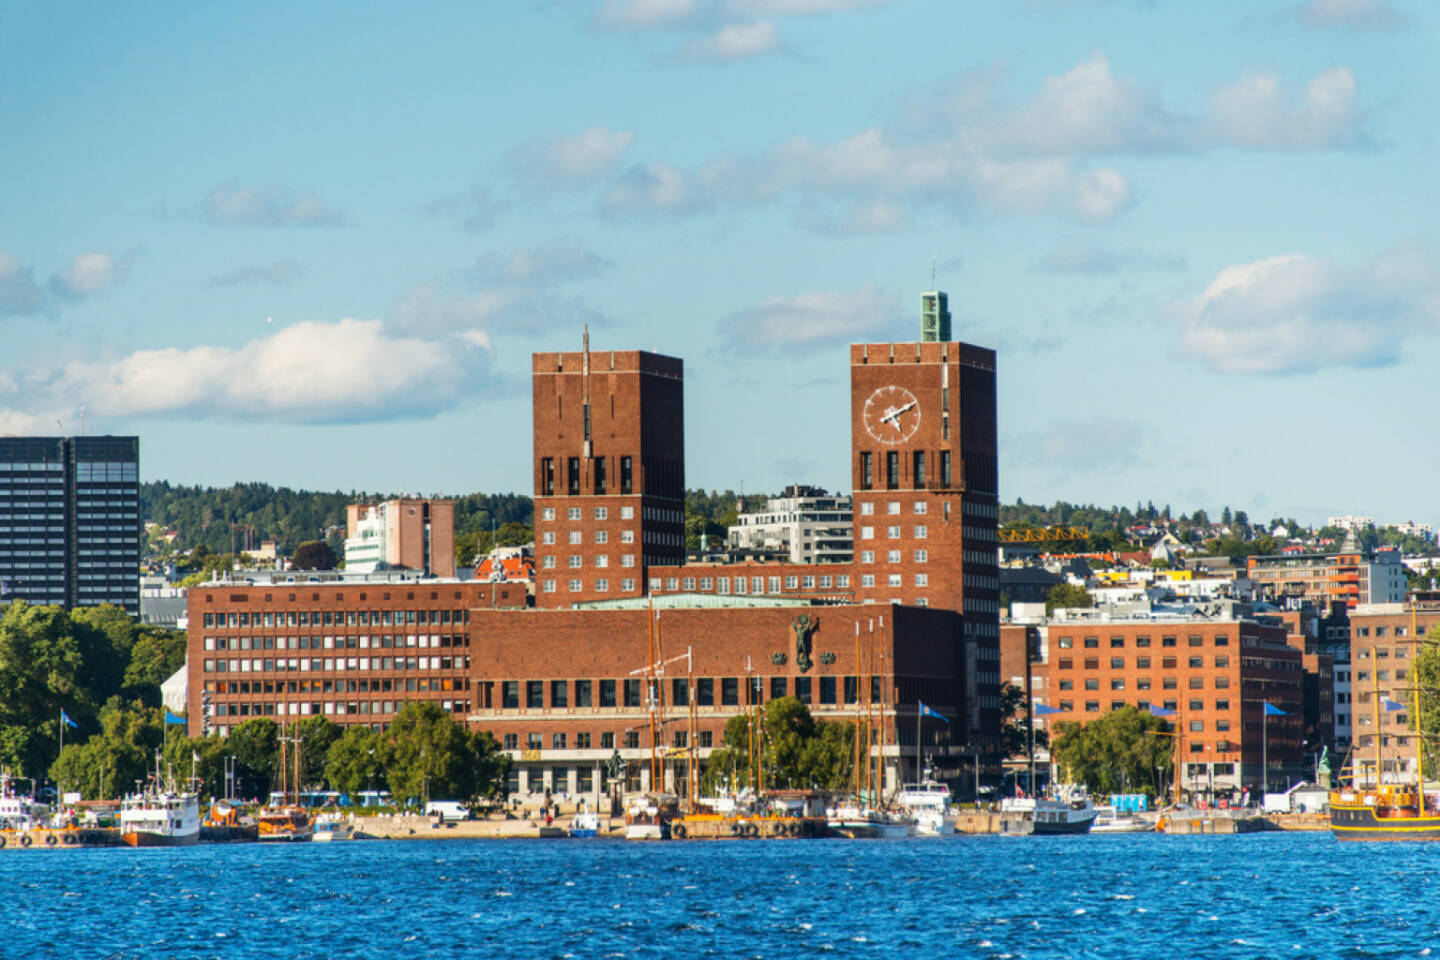 Oslo, Norwegen, http://www.shutterstock.com/de/pic-114486694/stock-photo-view-of-oslo-norway-radhuset-city-hall-from-the-sea.html 